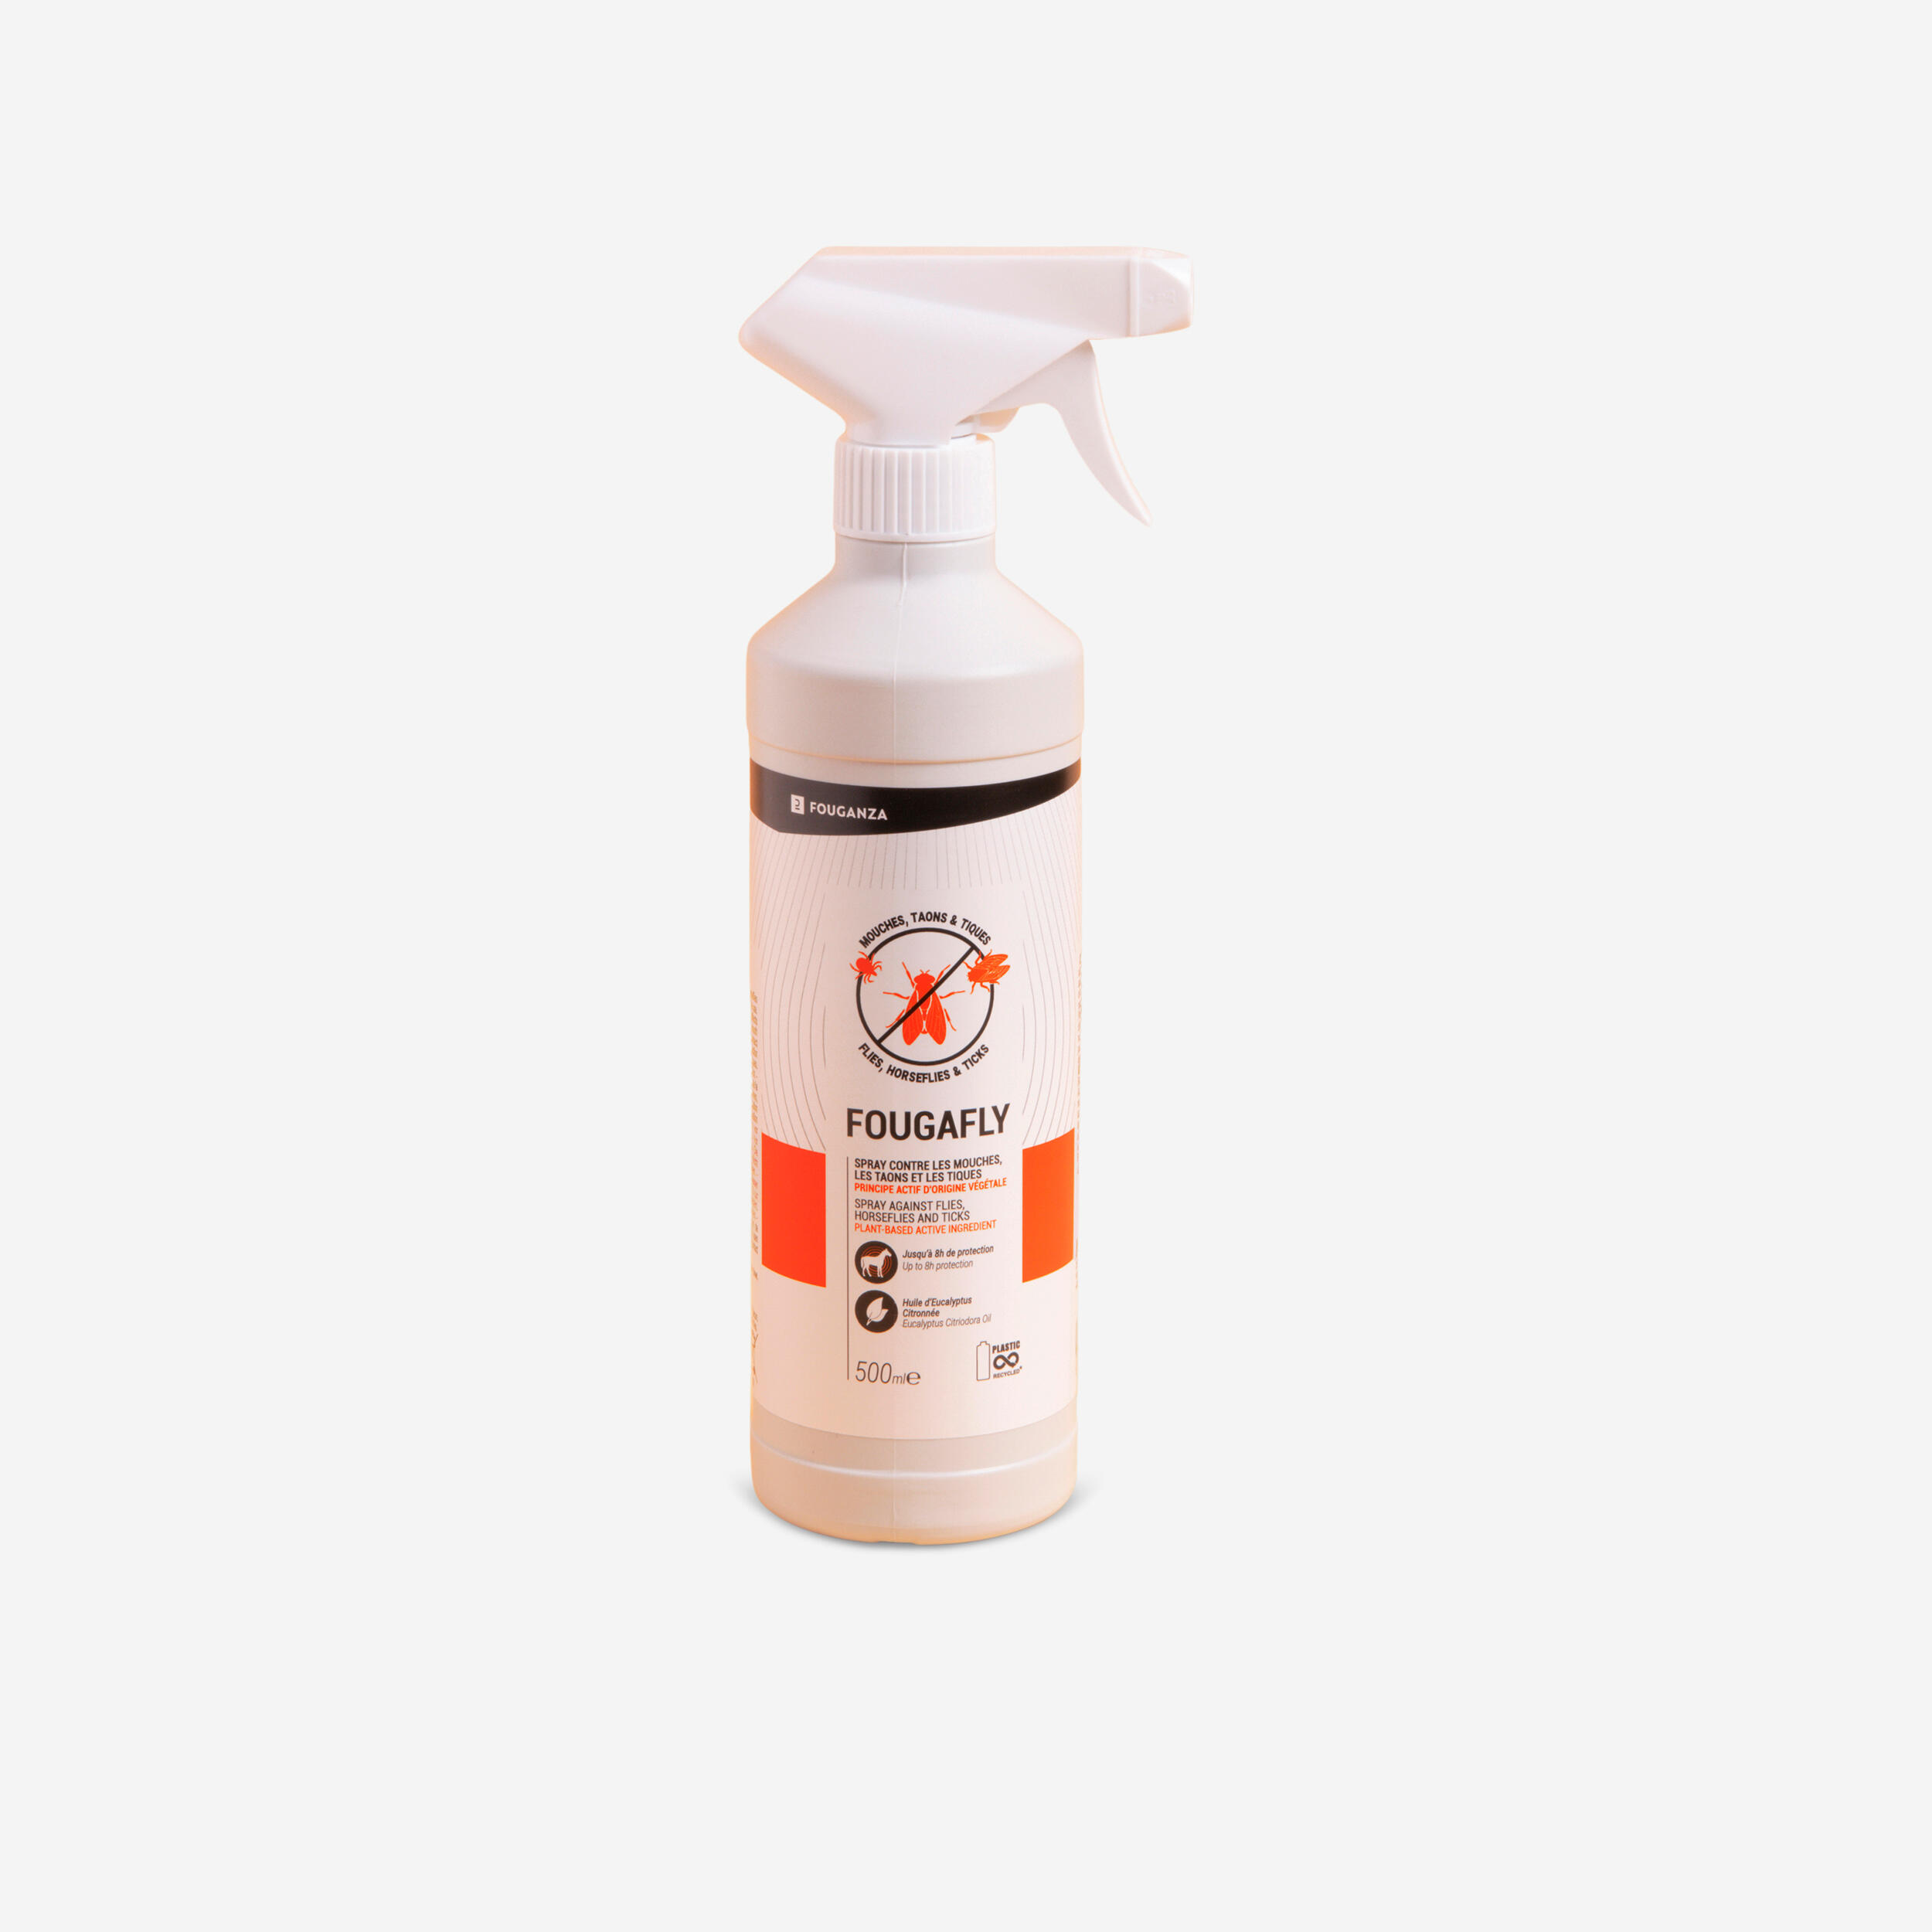 Horse Riding Insect Repellent Spray for Horse and Pony Fougafly - 500 ml 1/2